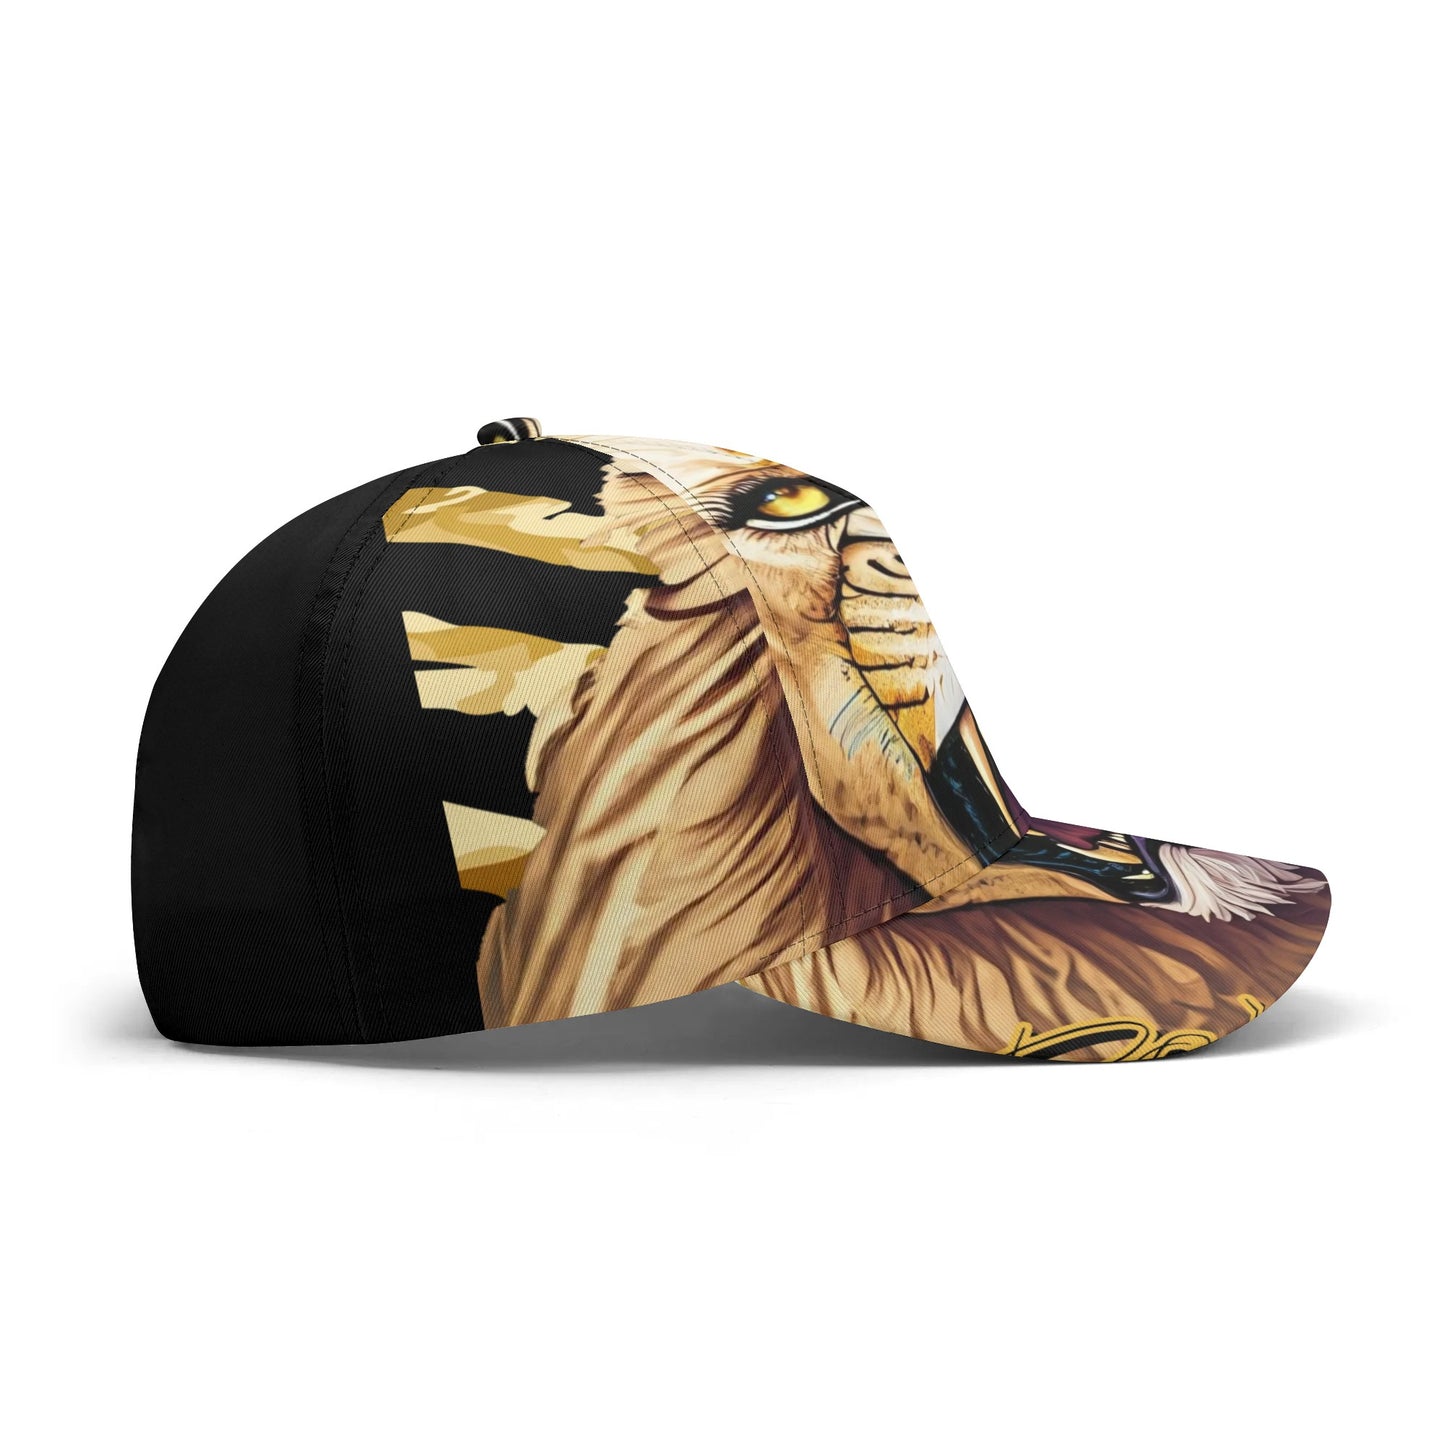 BOLD AS A LION- All-over Print Baseball Cap, Free Shipping